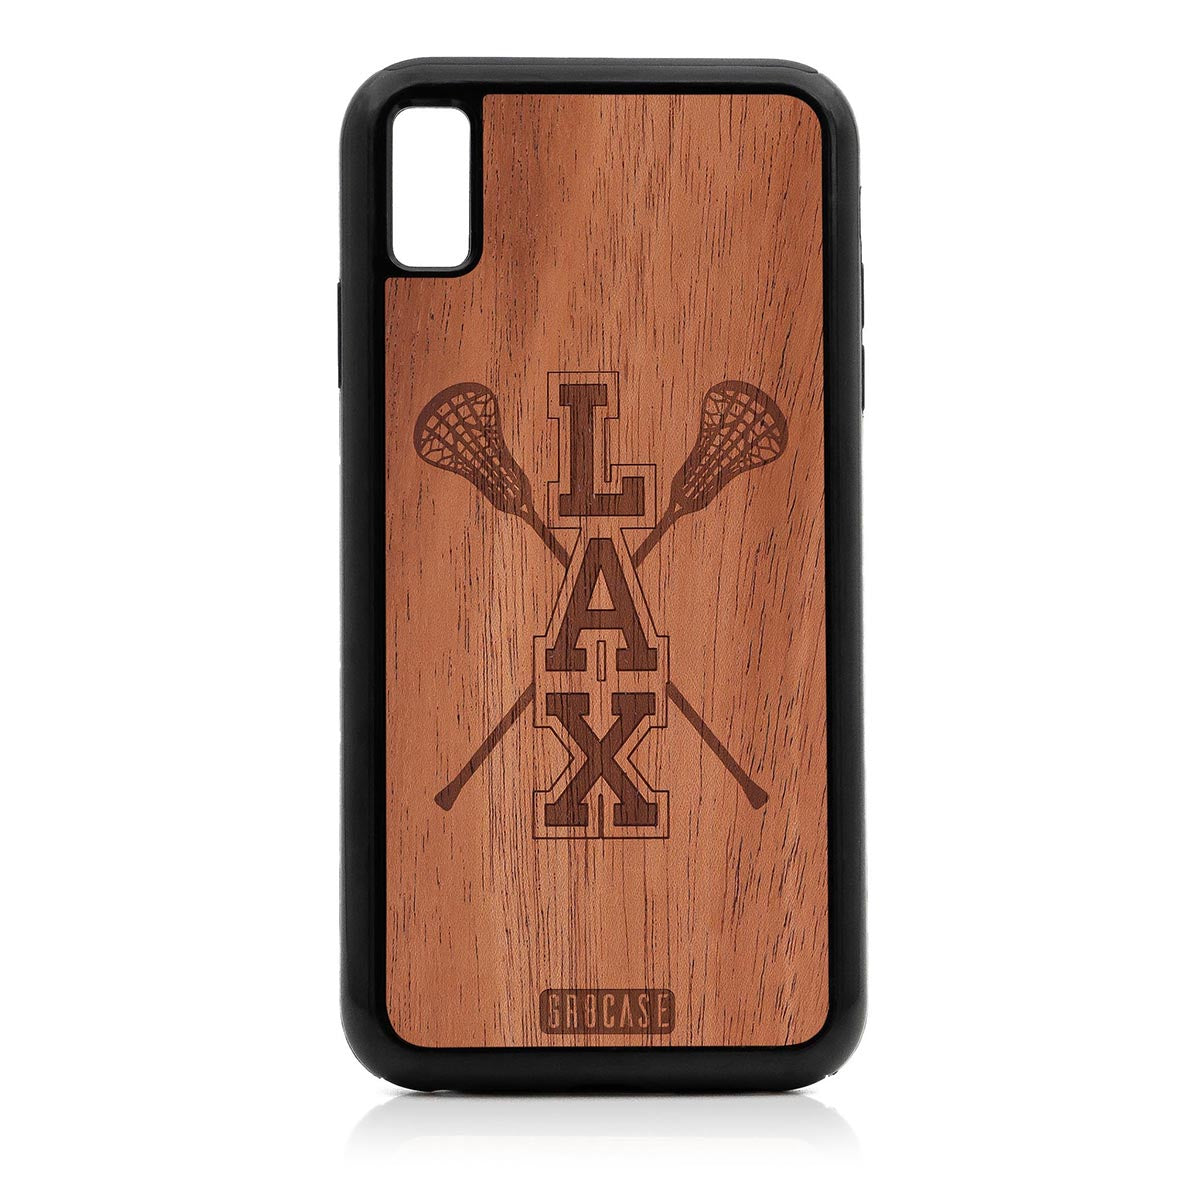 Lacrosse (LAX) Sticks Design Wood Case For iPhone XS Max by GR8CASE